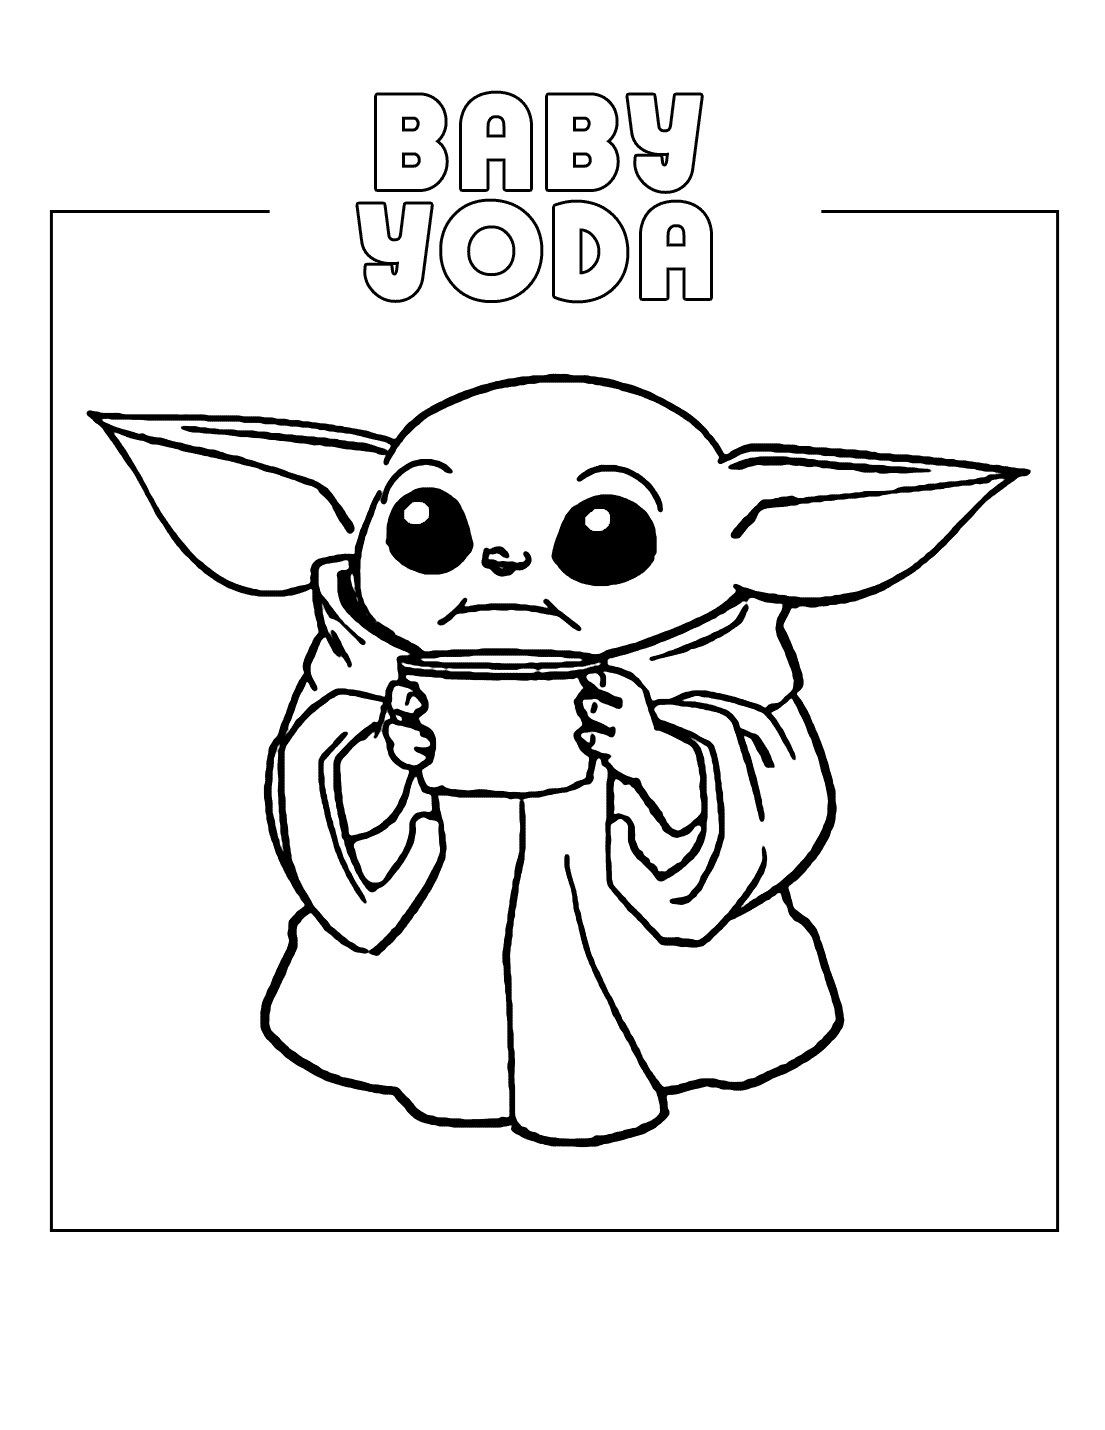 100+ Baby Yoda Coloring Pages 1